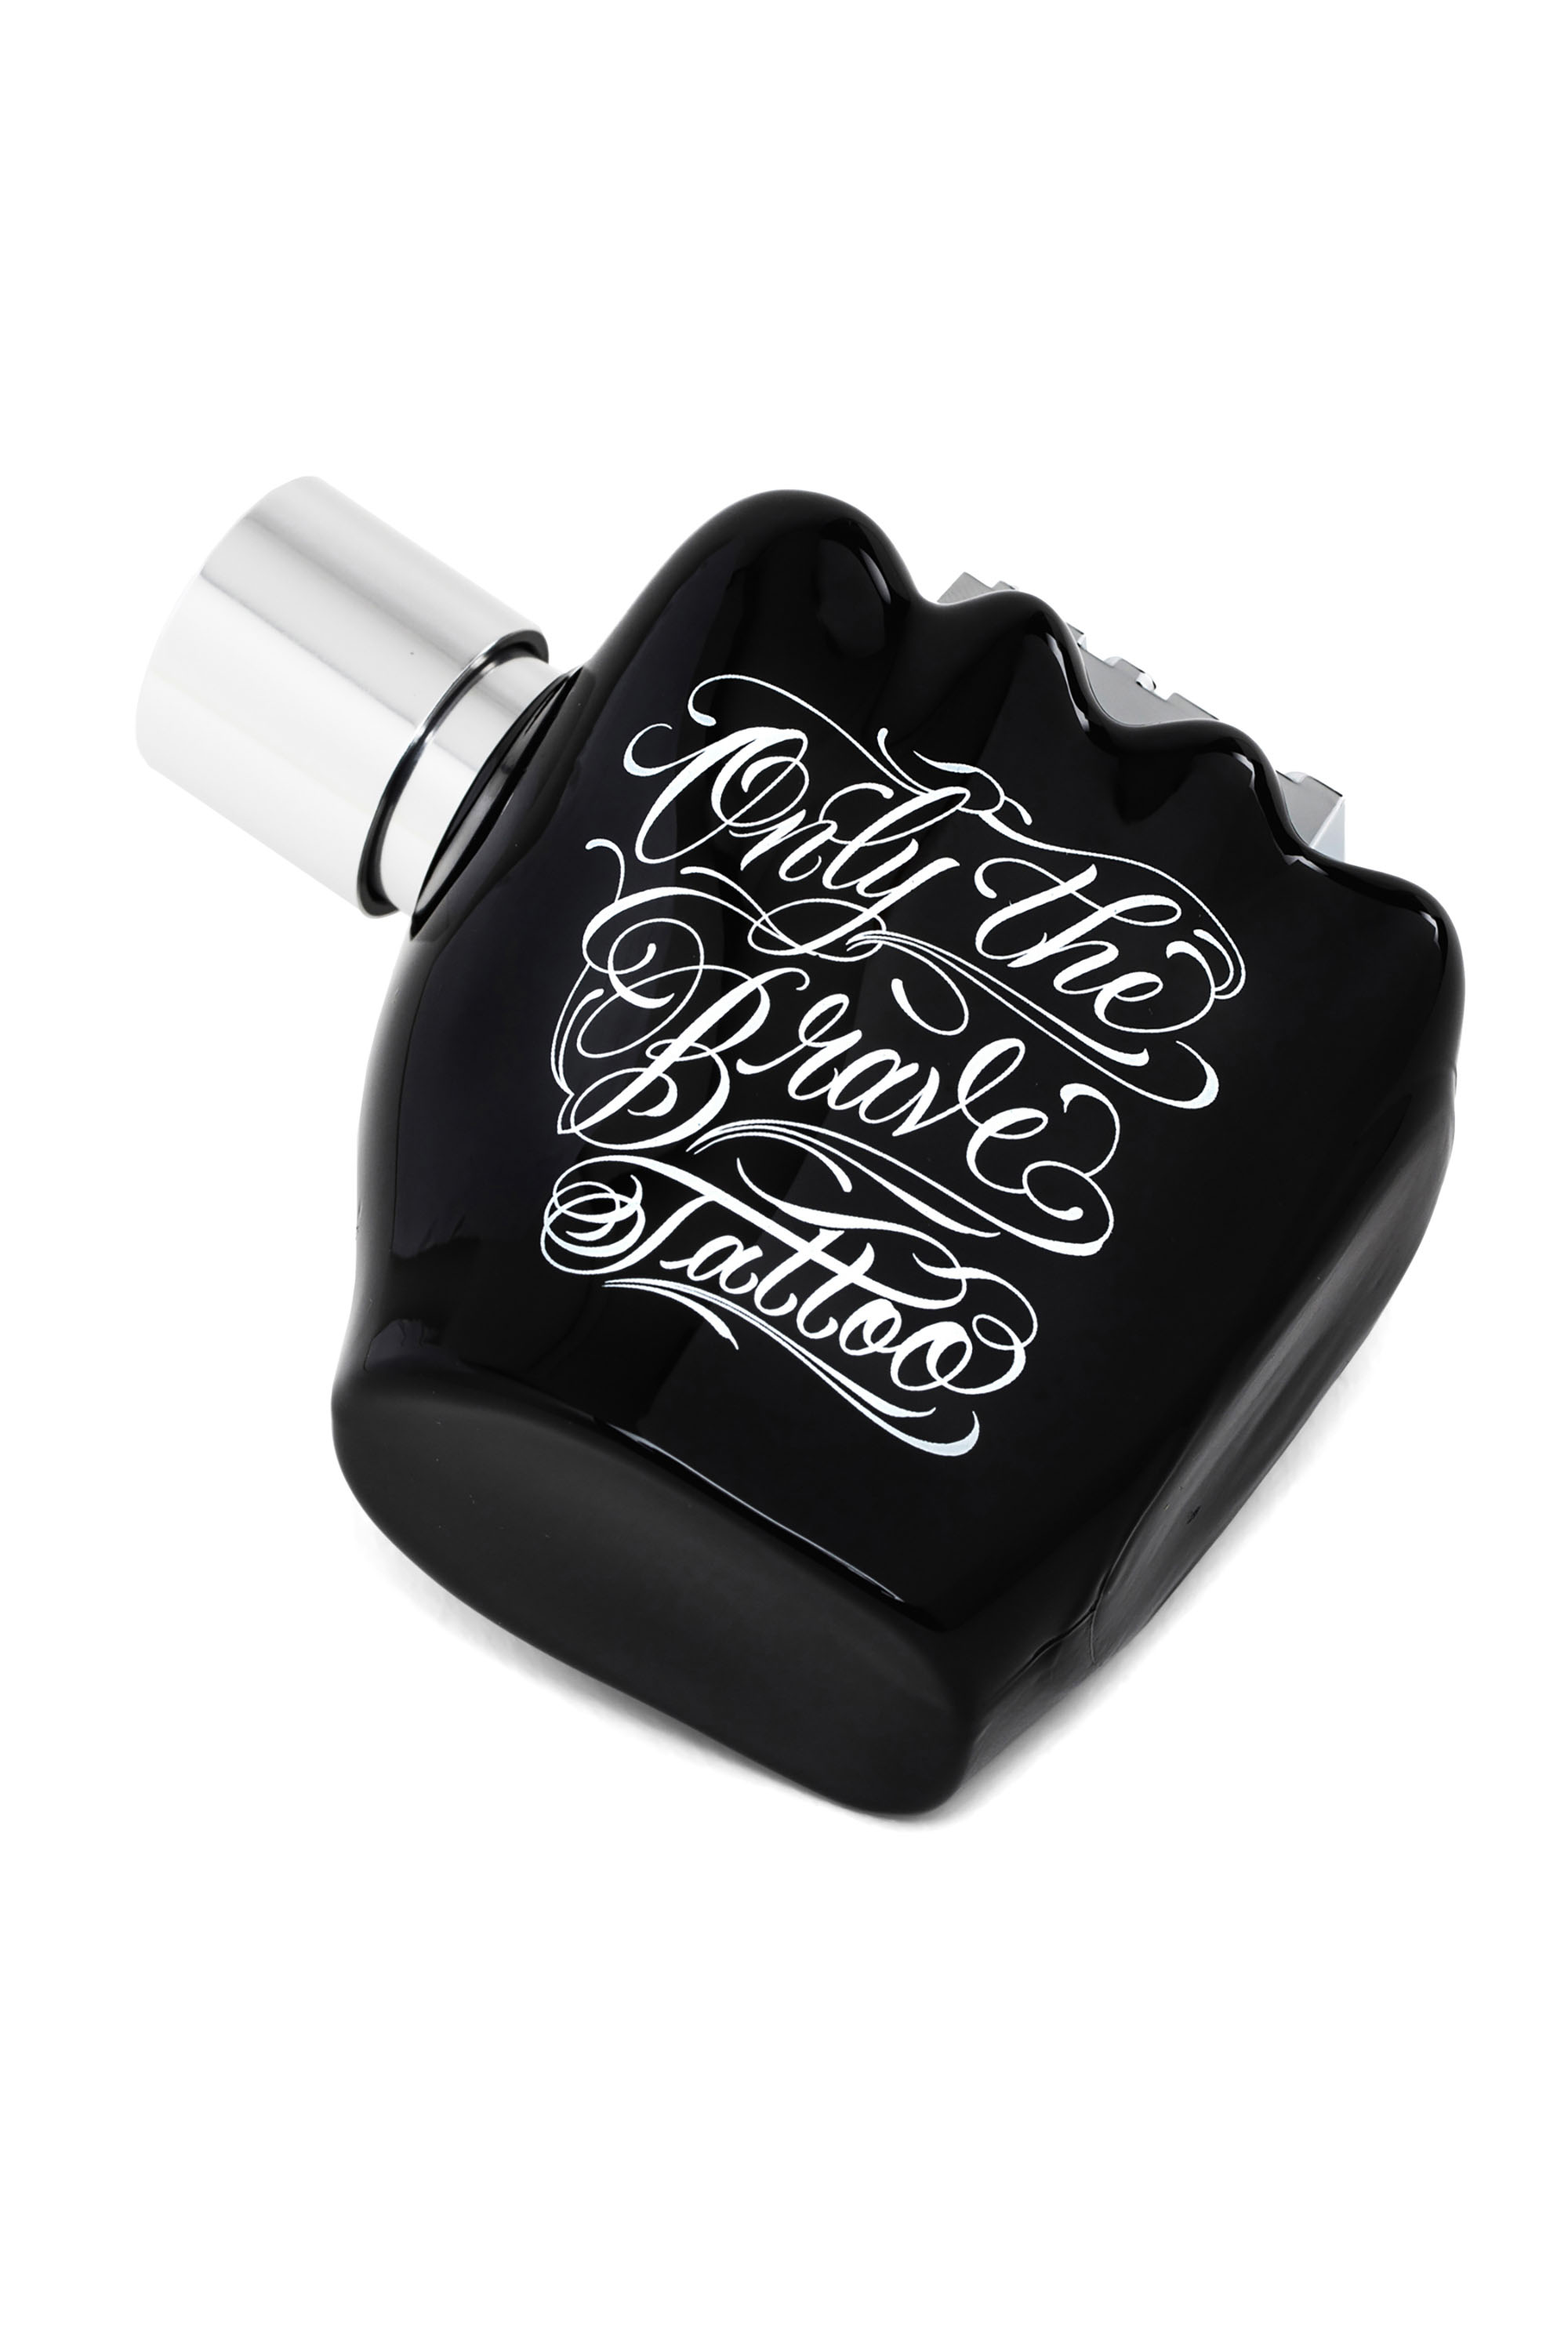 diesel only the brave tattoo 50ml